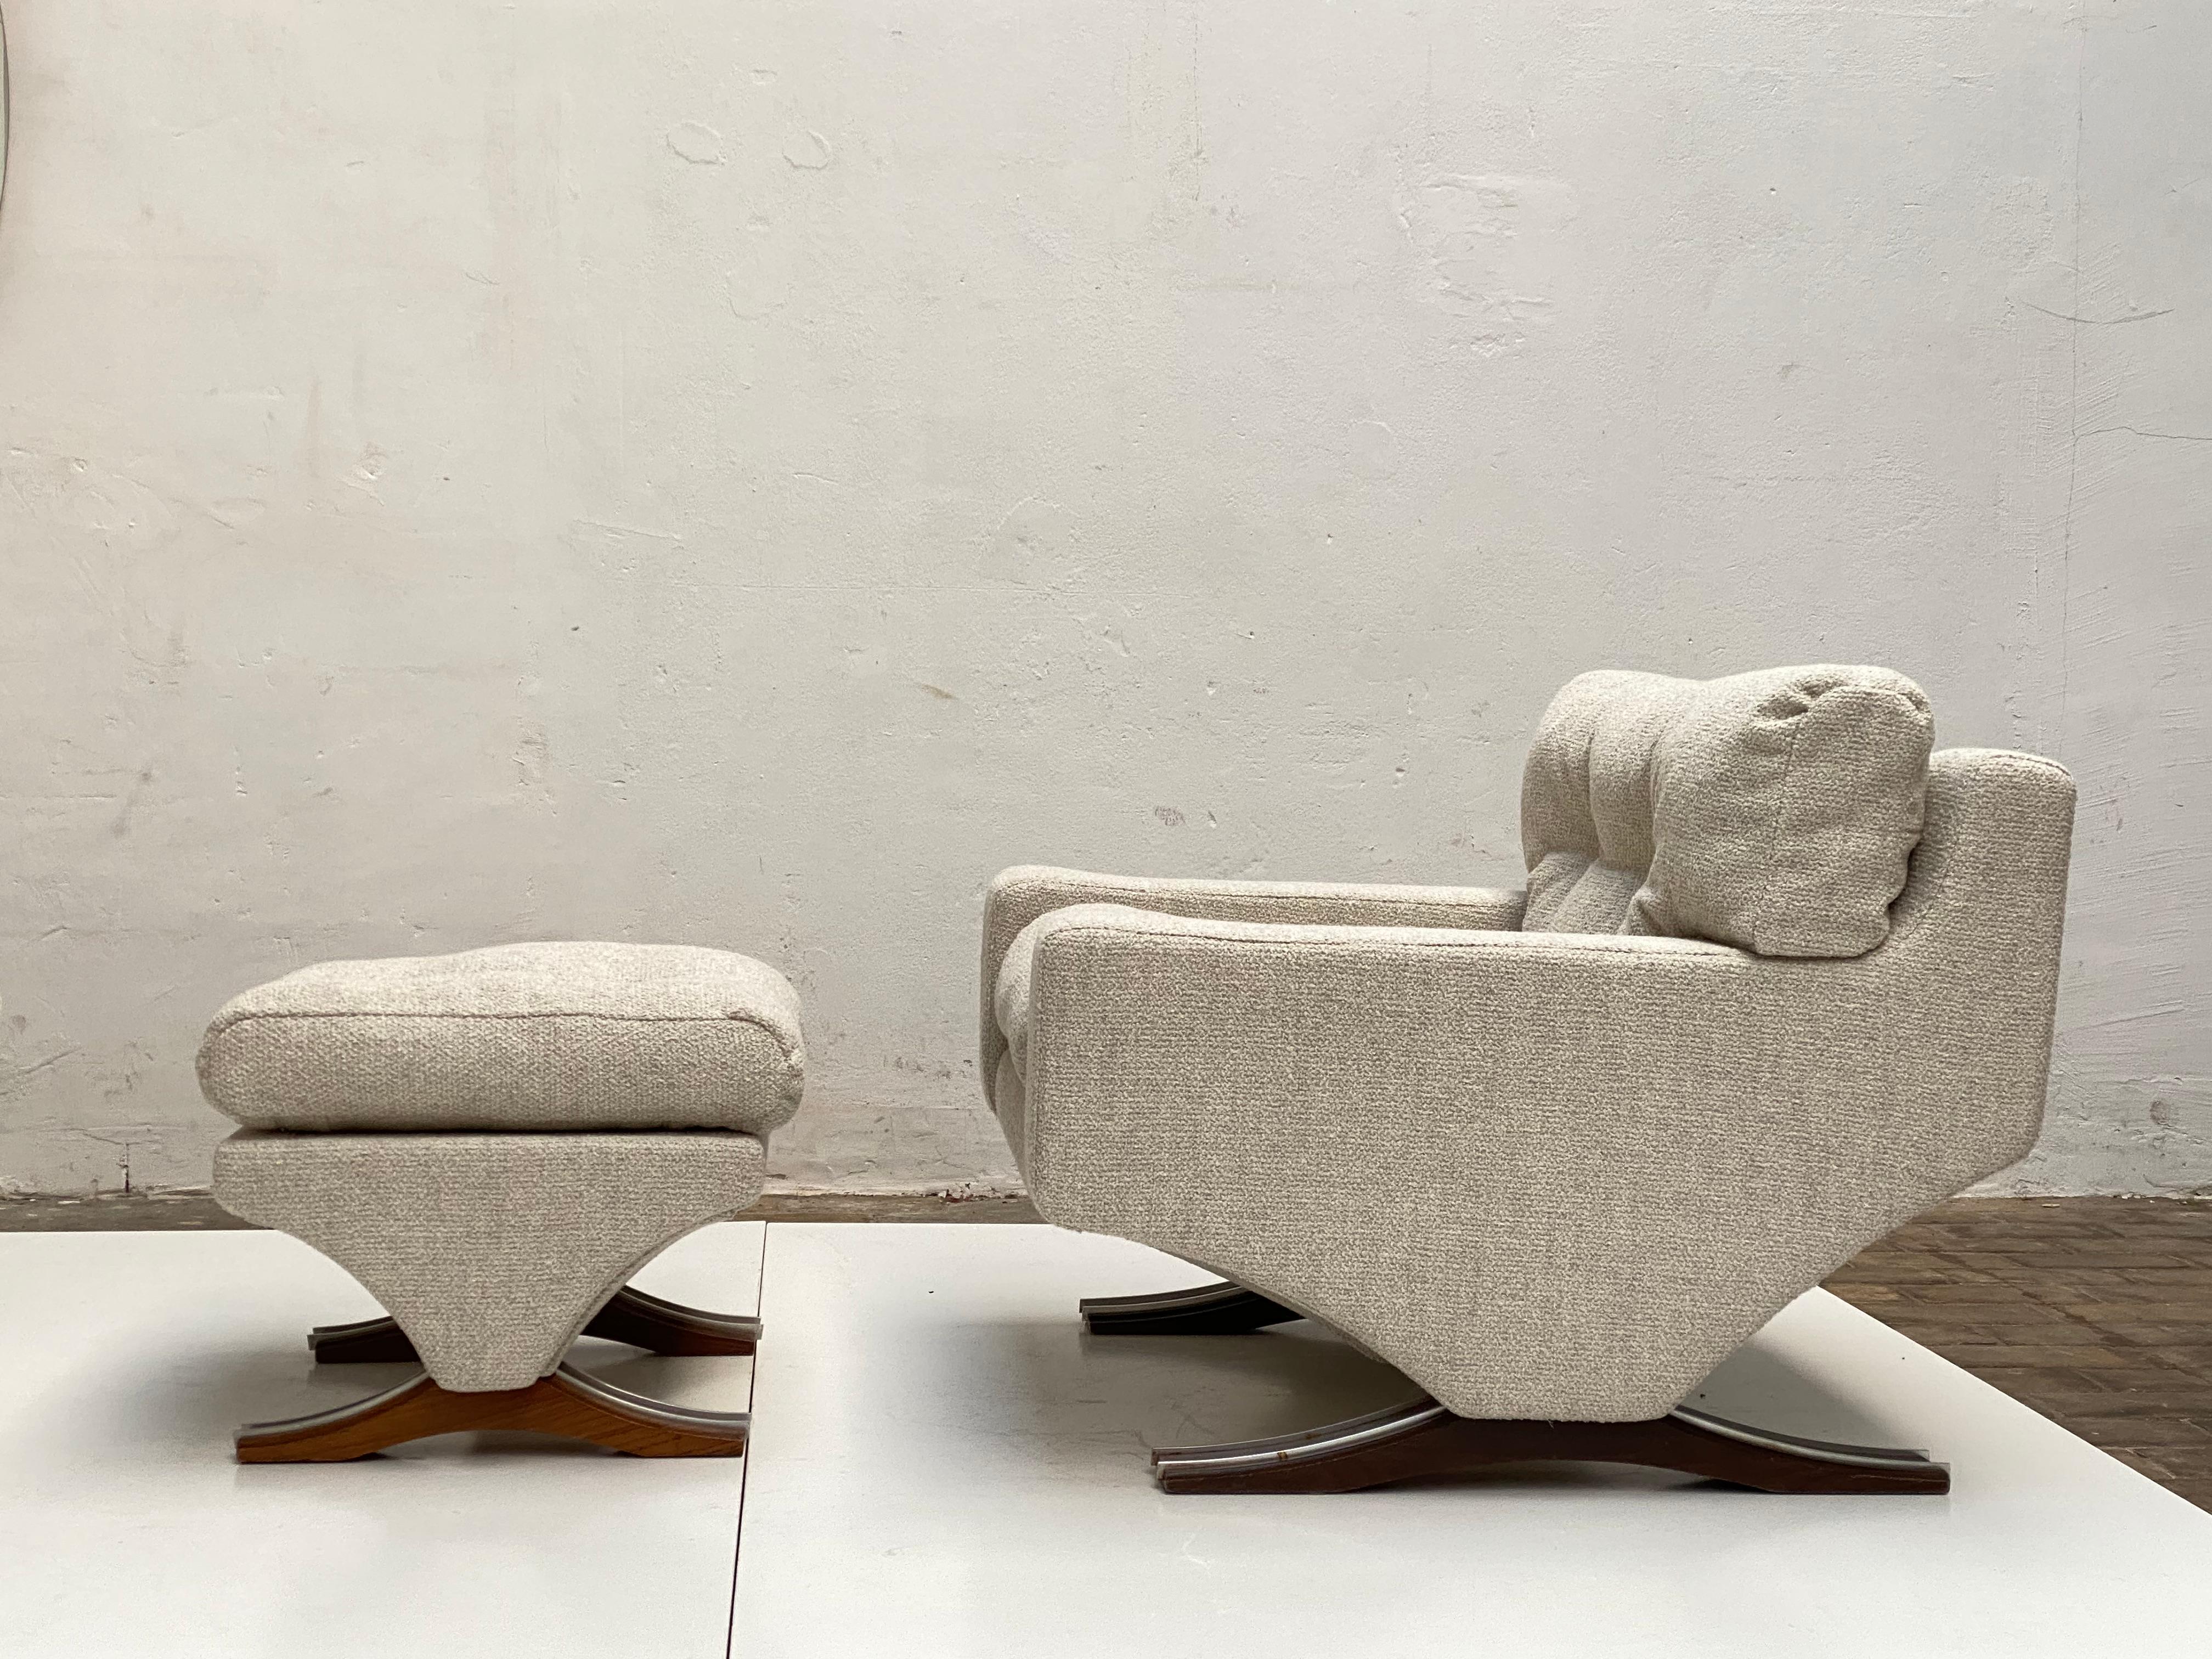 Rubber Monumental 'Magister' Lounge Chairs and Ottomans by Sculptor Franz Sartori, 1966